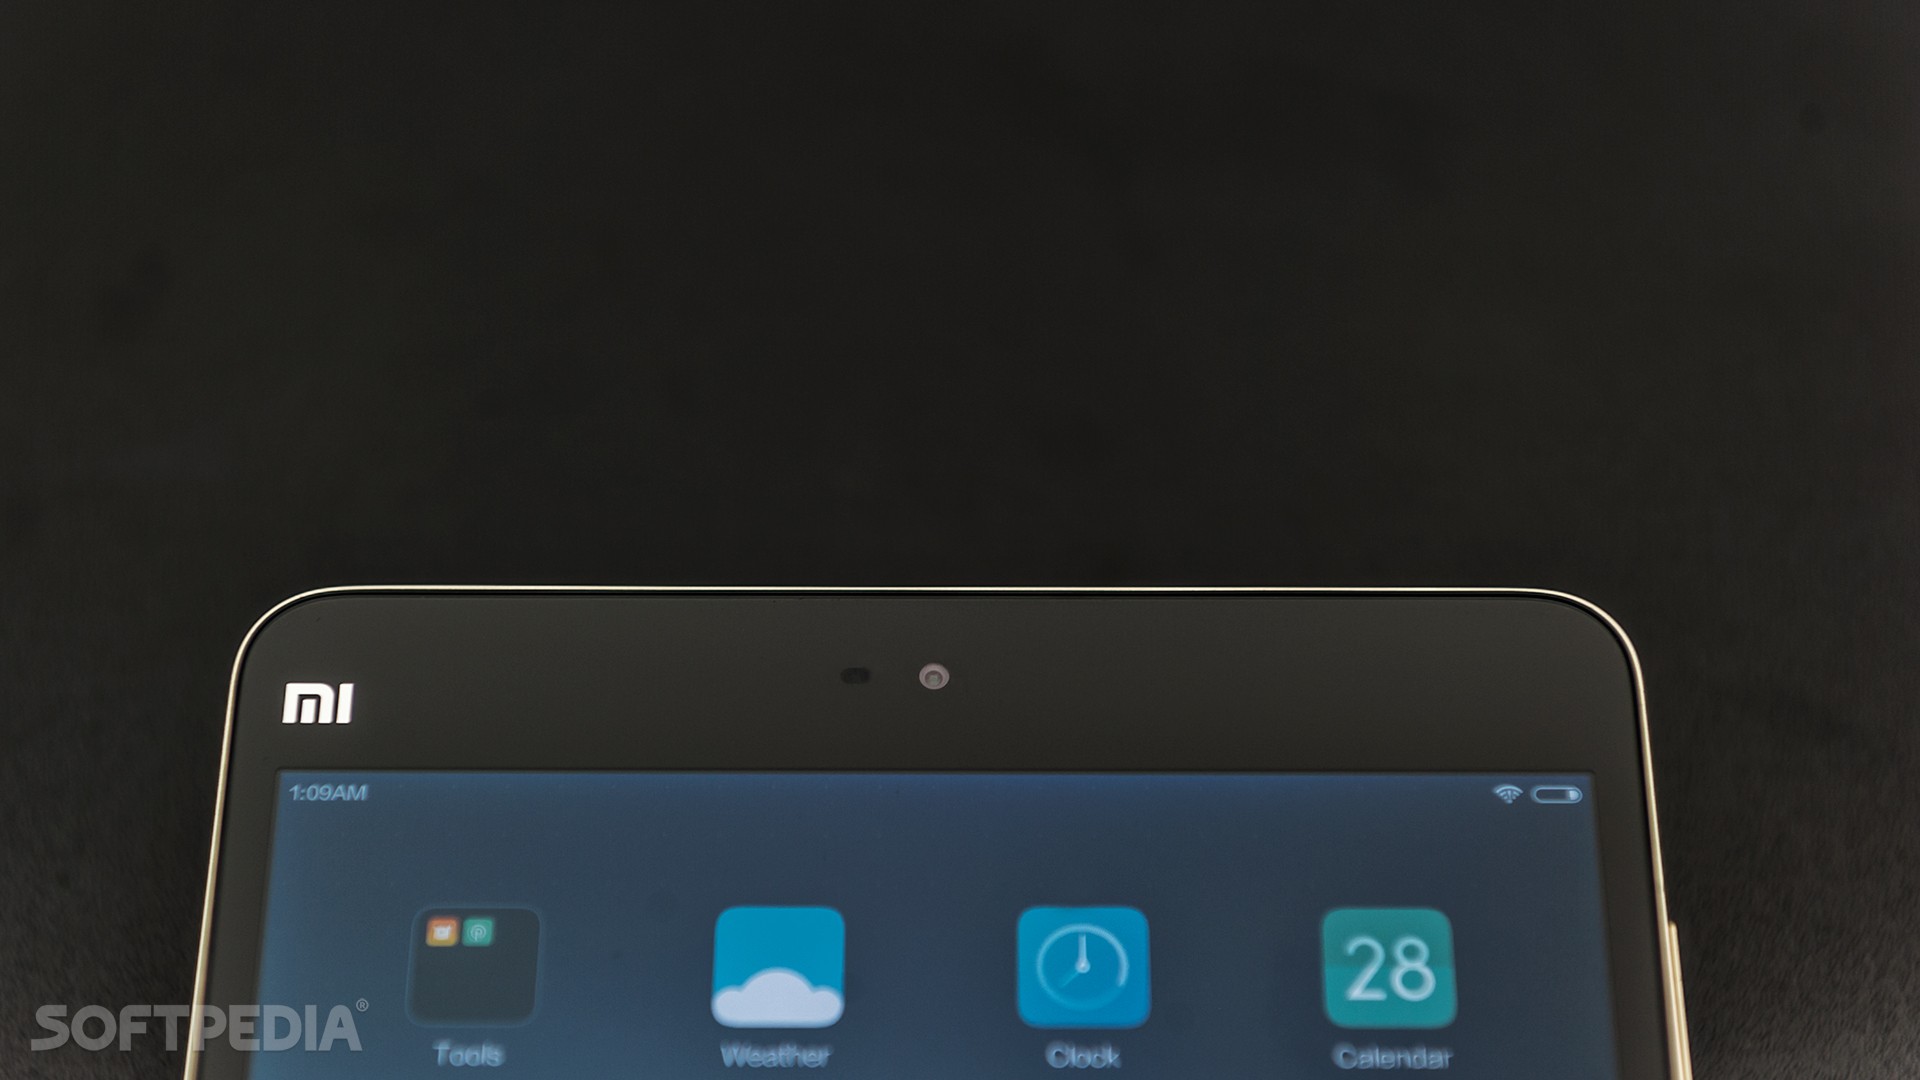 REVIEW: Xiaomi Mi Pad 2 Android Tablet in 2020 - A Budget Choice? [2K 7.9  Display] 